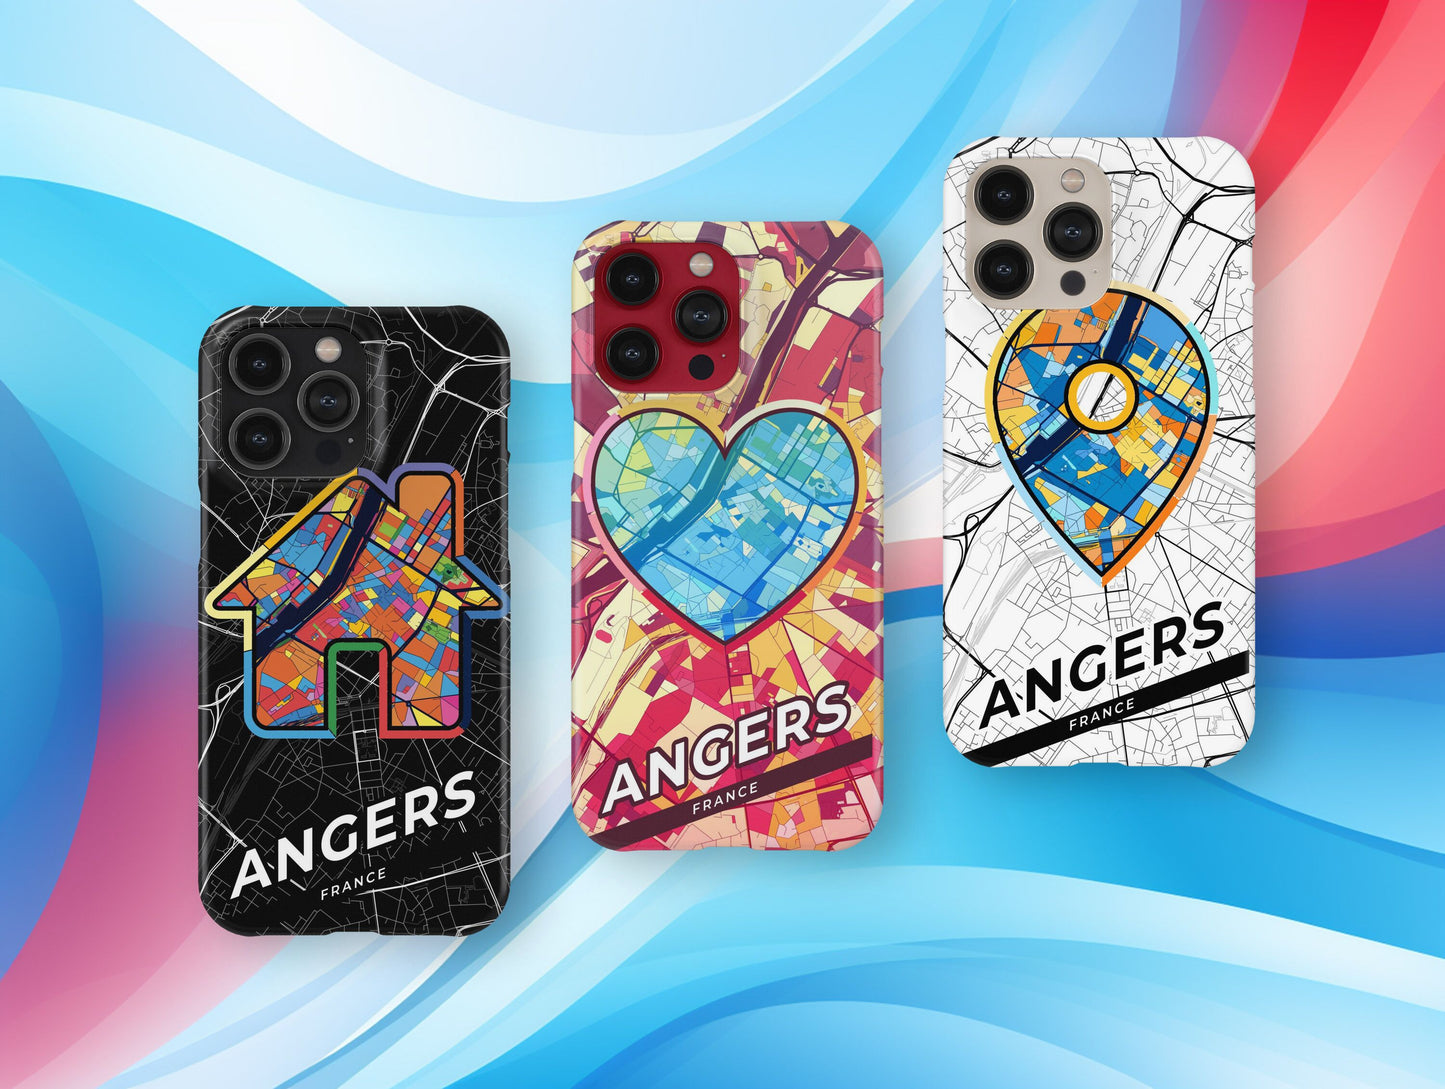 Angers France slim phone case with colorful icon. Birthday, wedding or housewarming gift. Couple match cases.